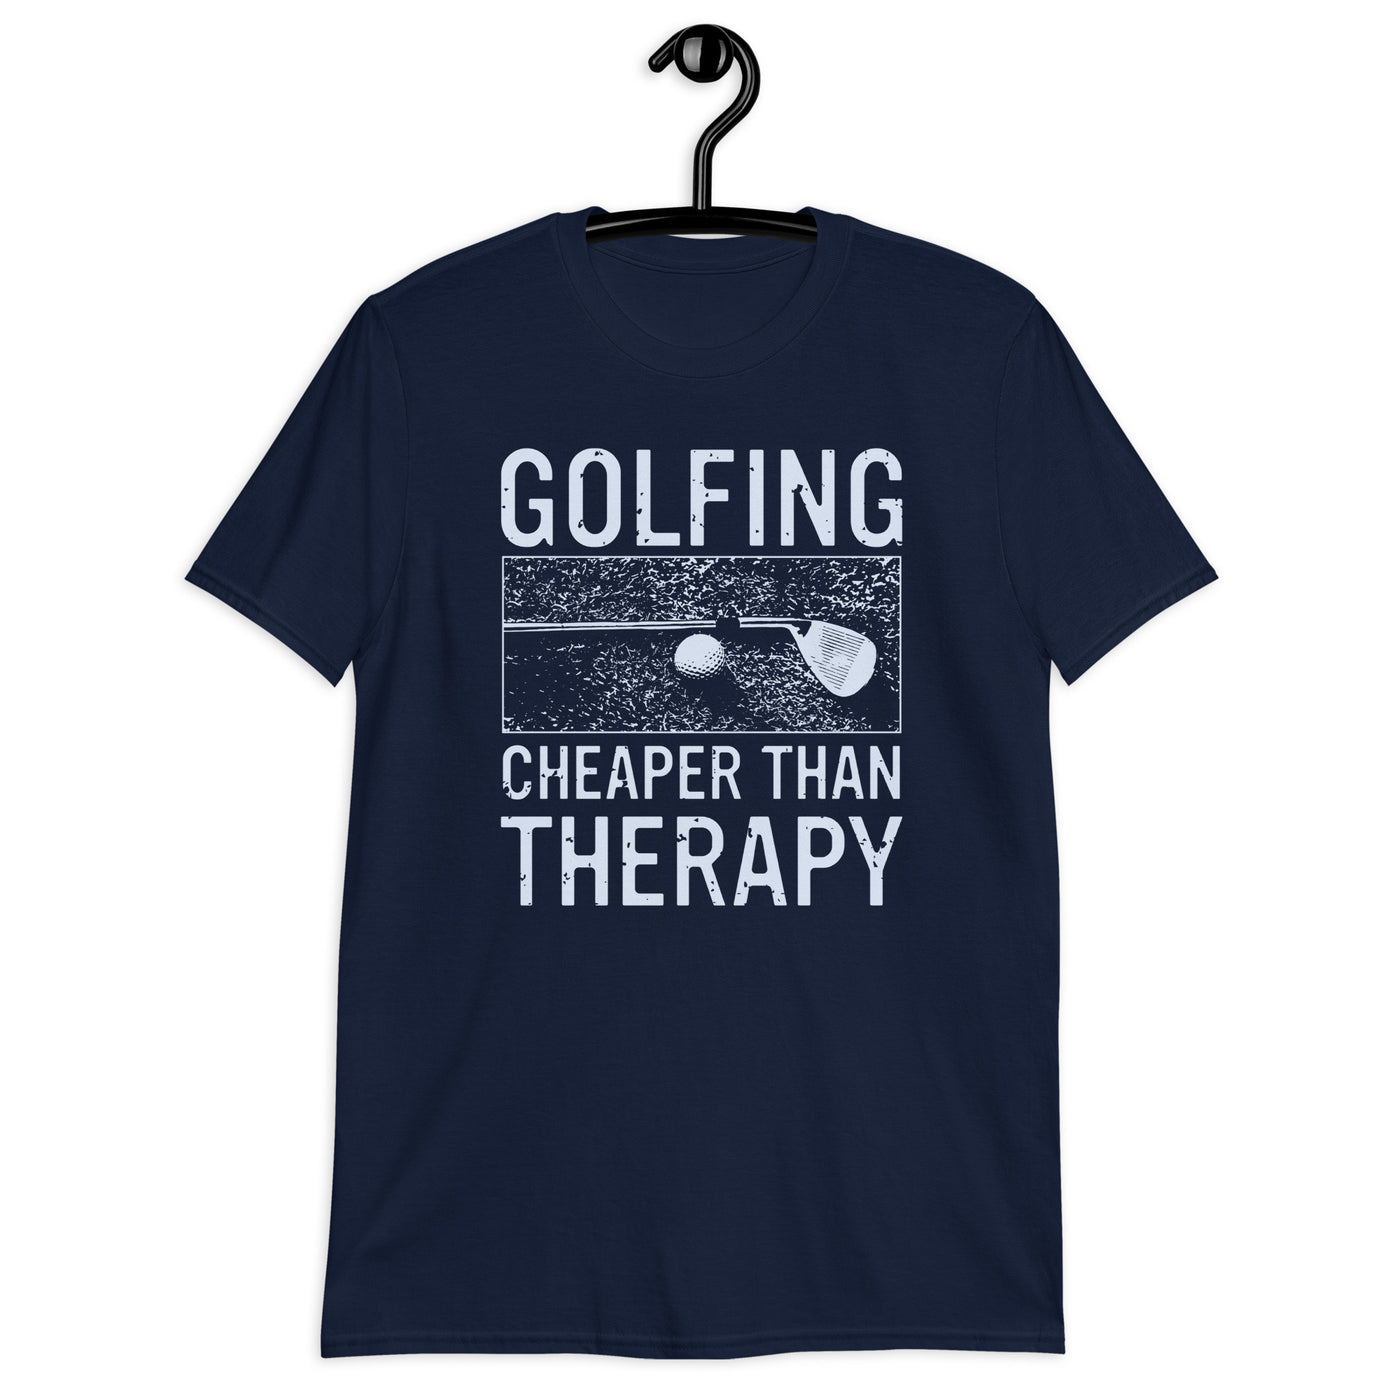 Golfing, cheaper than therapy